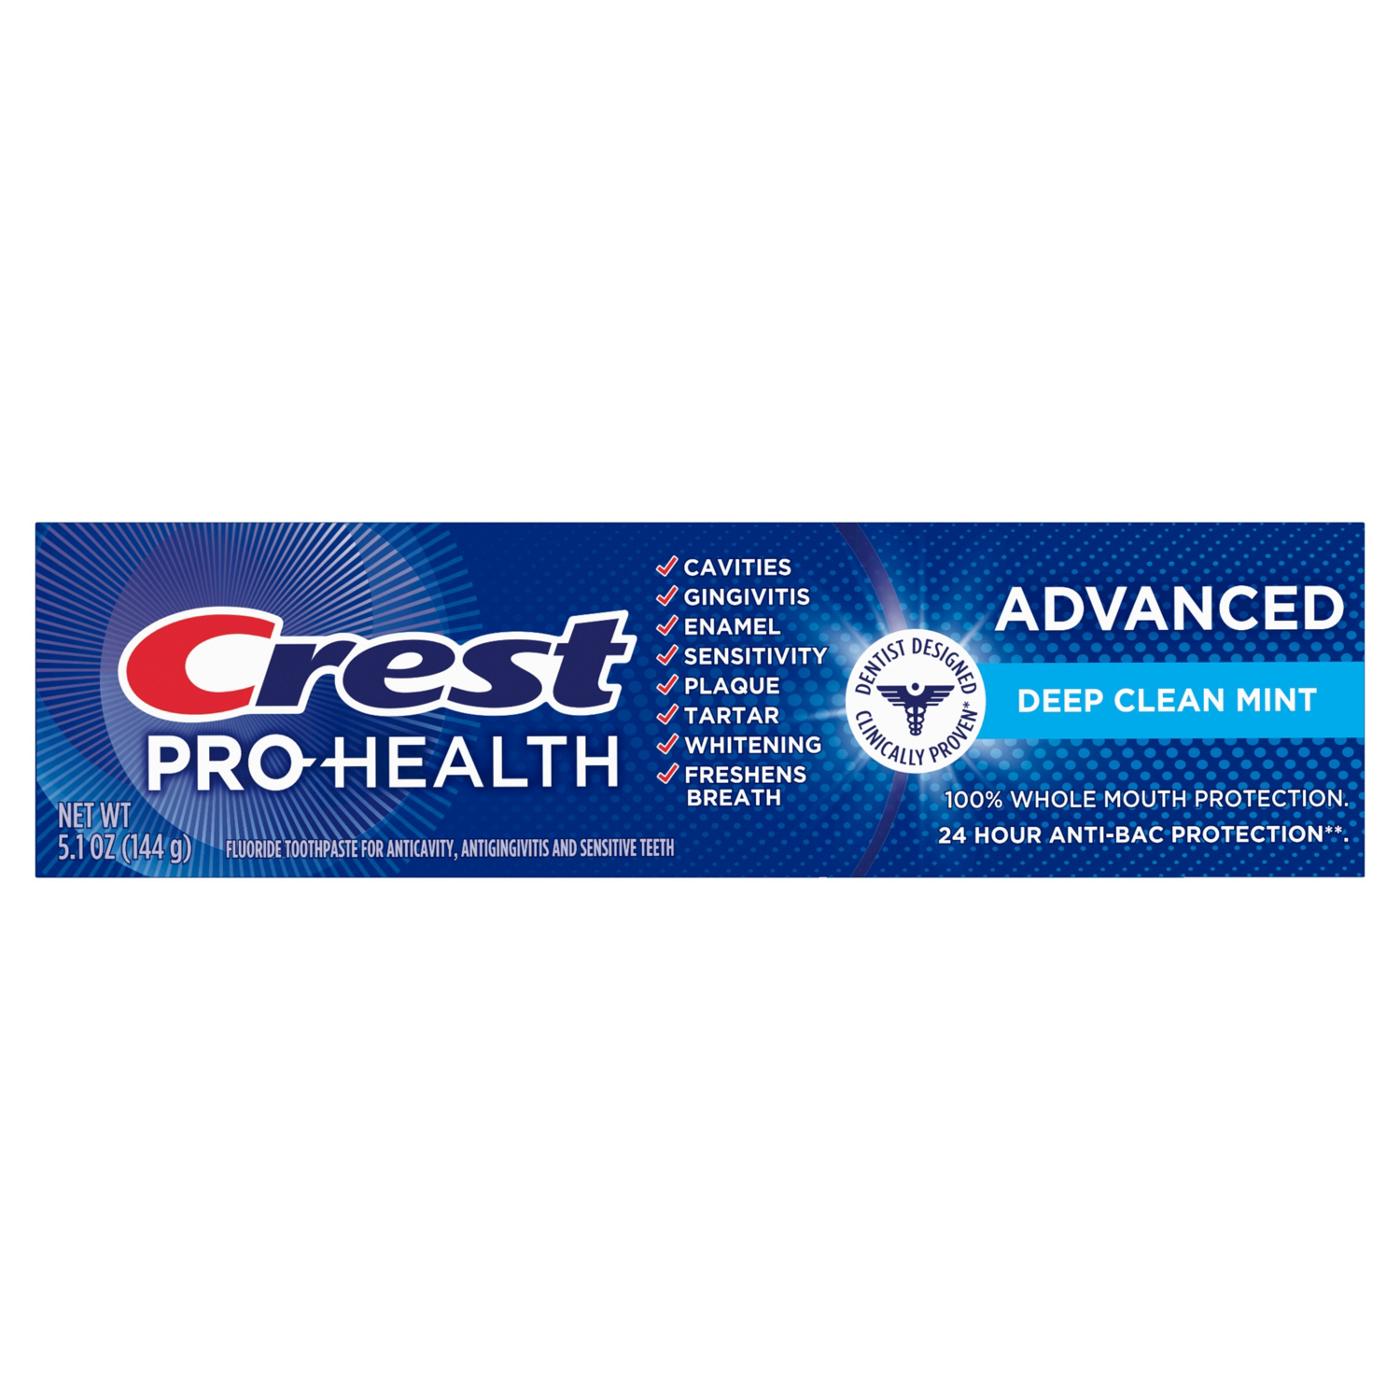 Crest Pro-Health Advanced Tooth Paste - Deep Clean Mint; image 1 of 9